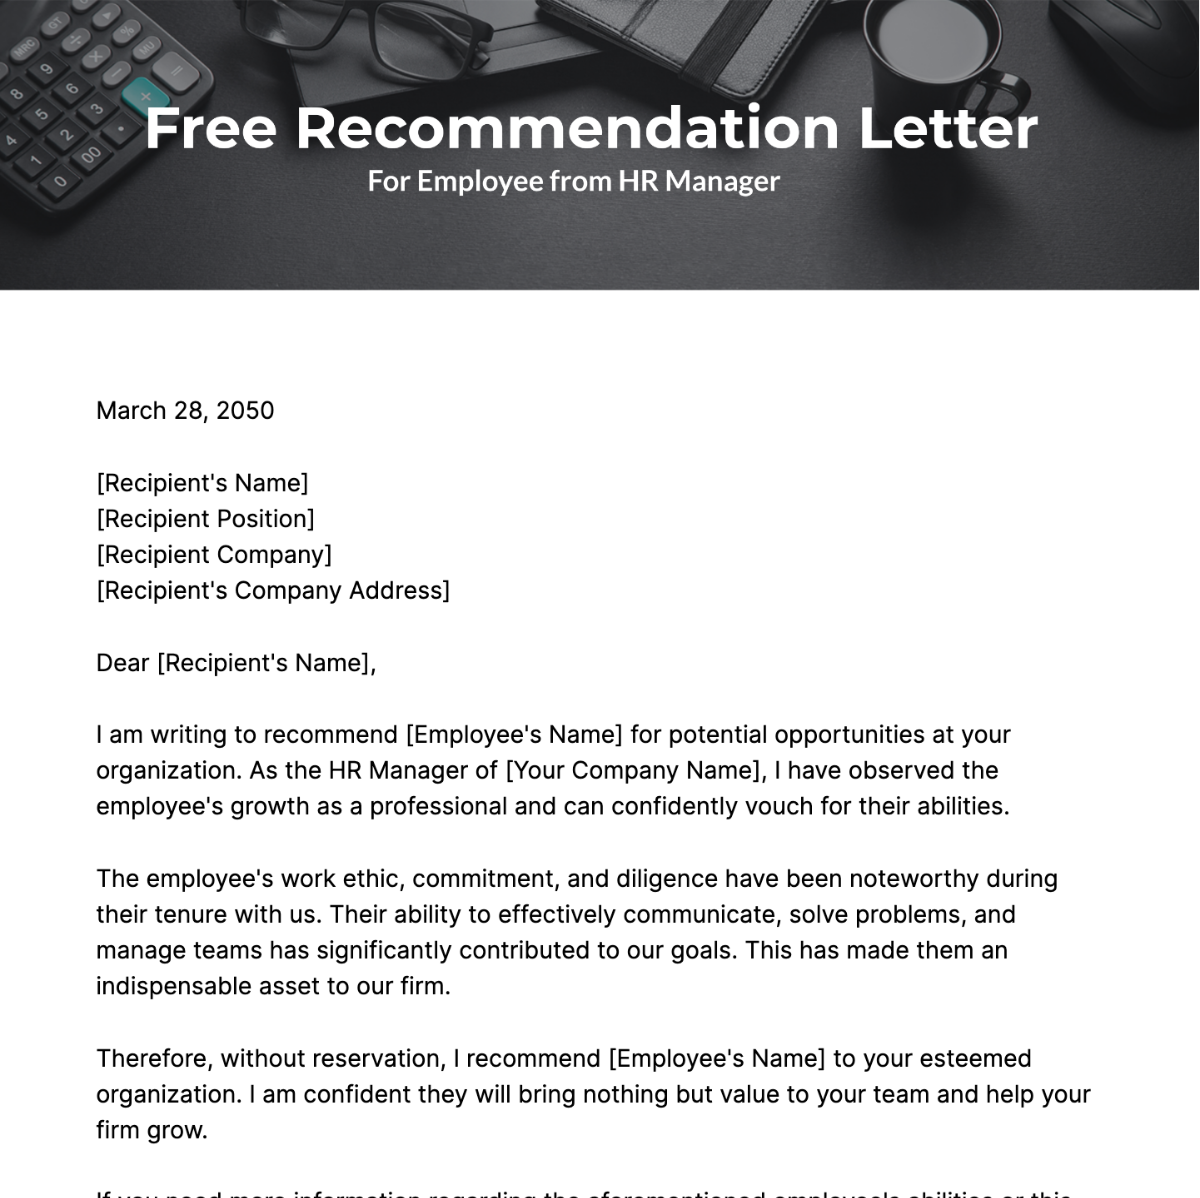 Recommendation Letter for Employee from HR Manager Template